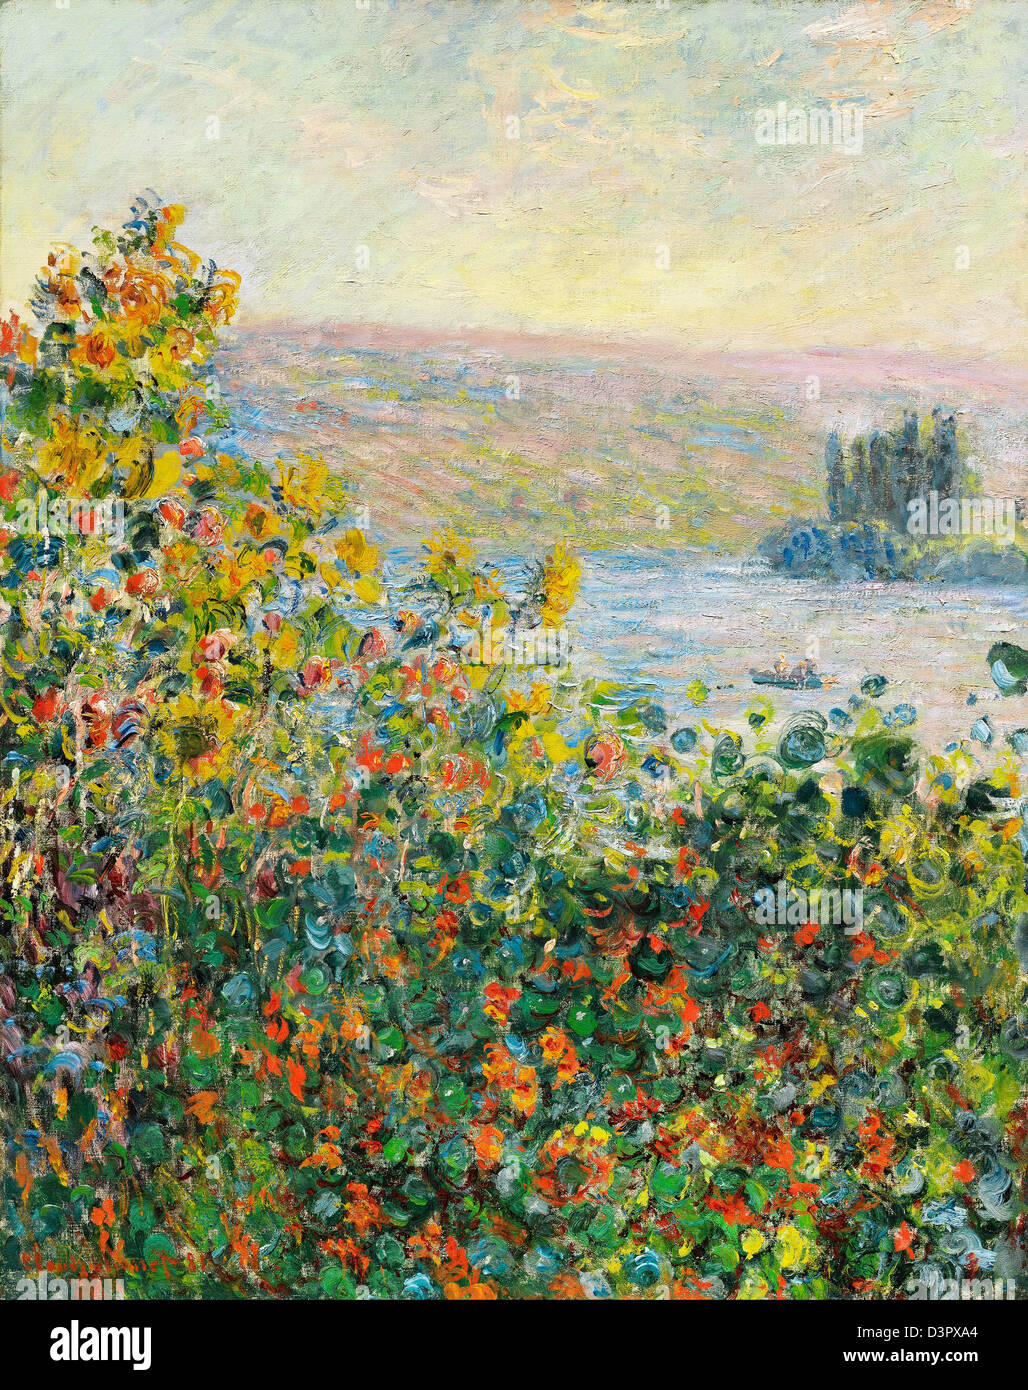 Claude Monet, Flower Beds at Vétheuil 1881 Oil on canvas. Museum of Fine Arts, Boston Stock Photo